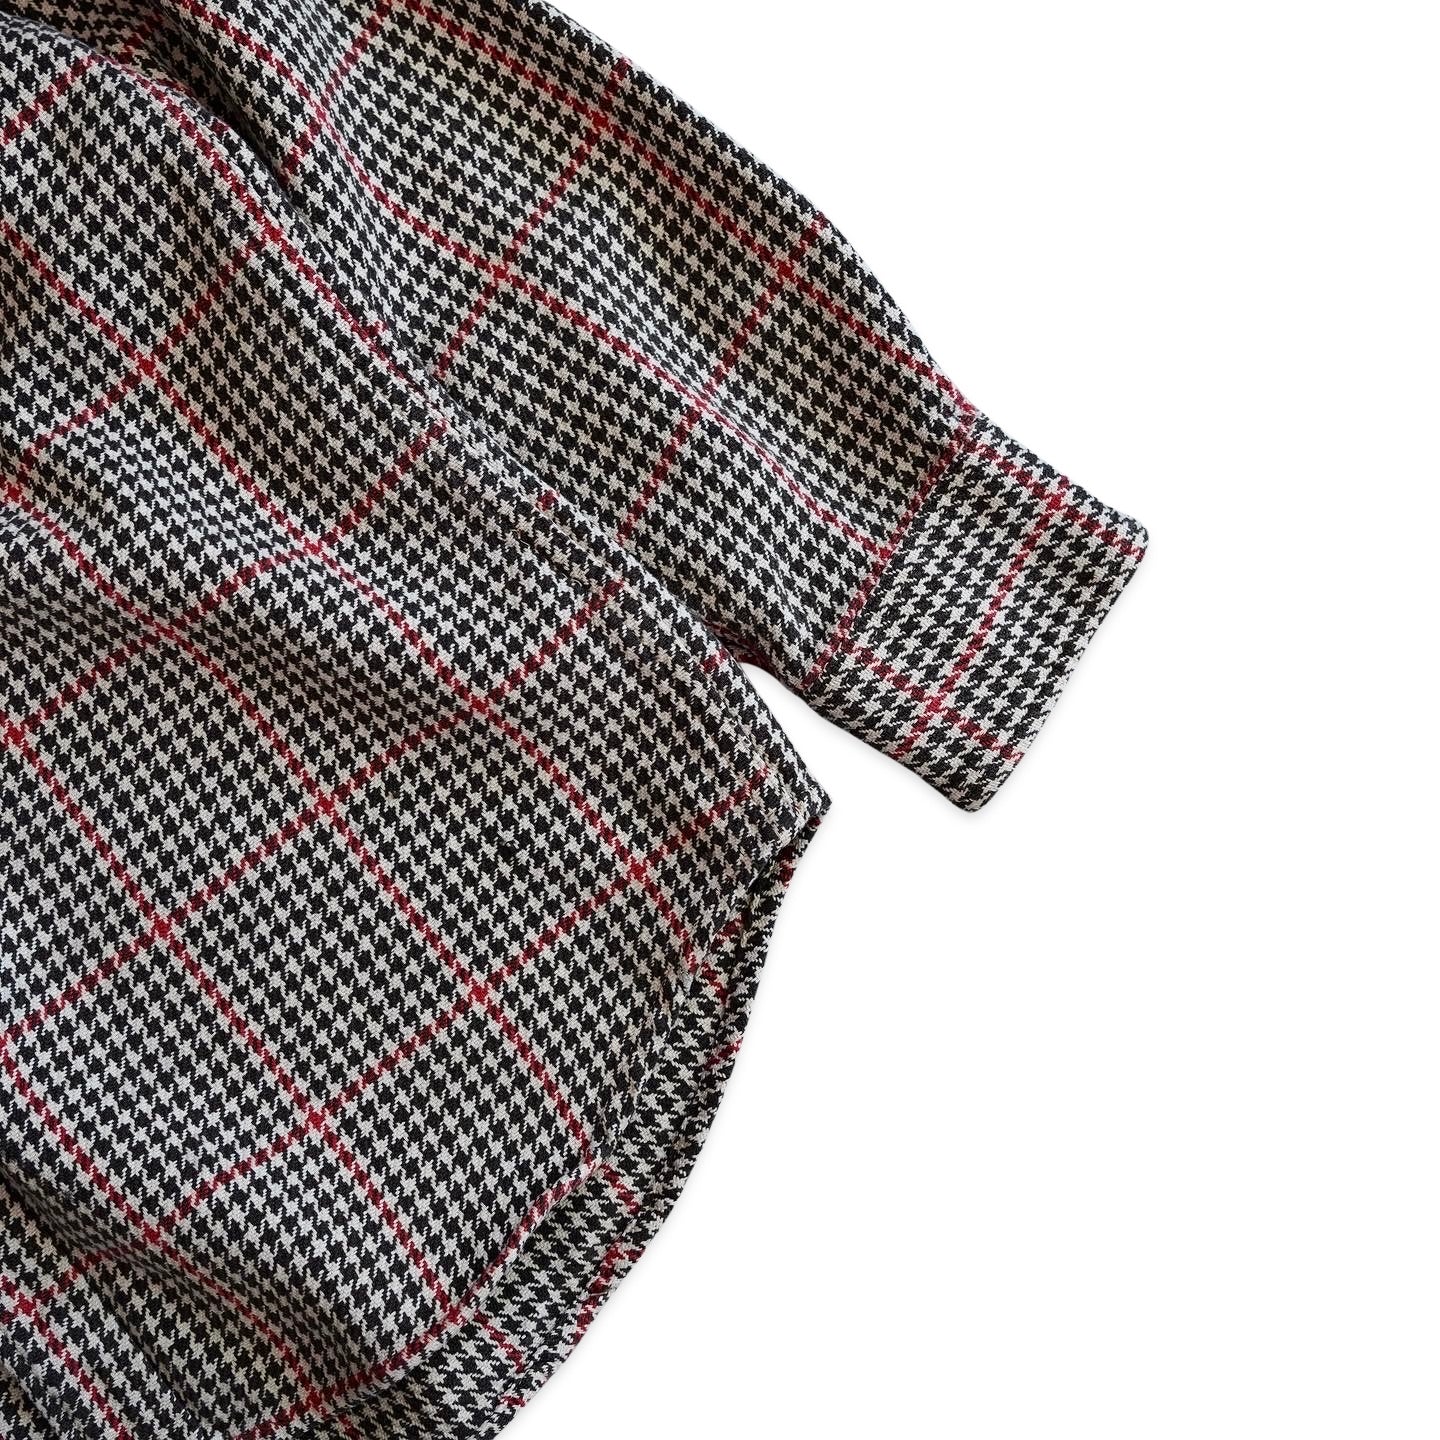 J.Crew Heavy Cotton Houndstooth Woven Shirt